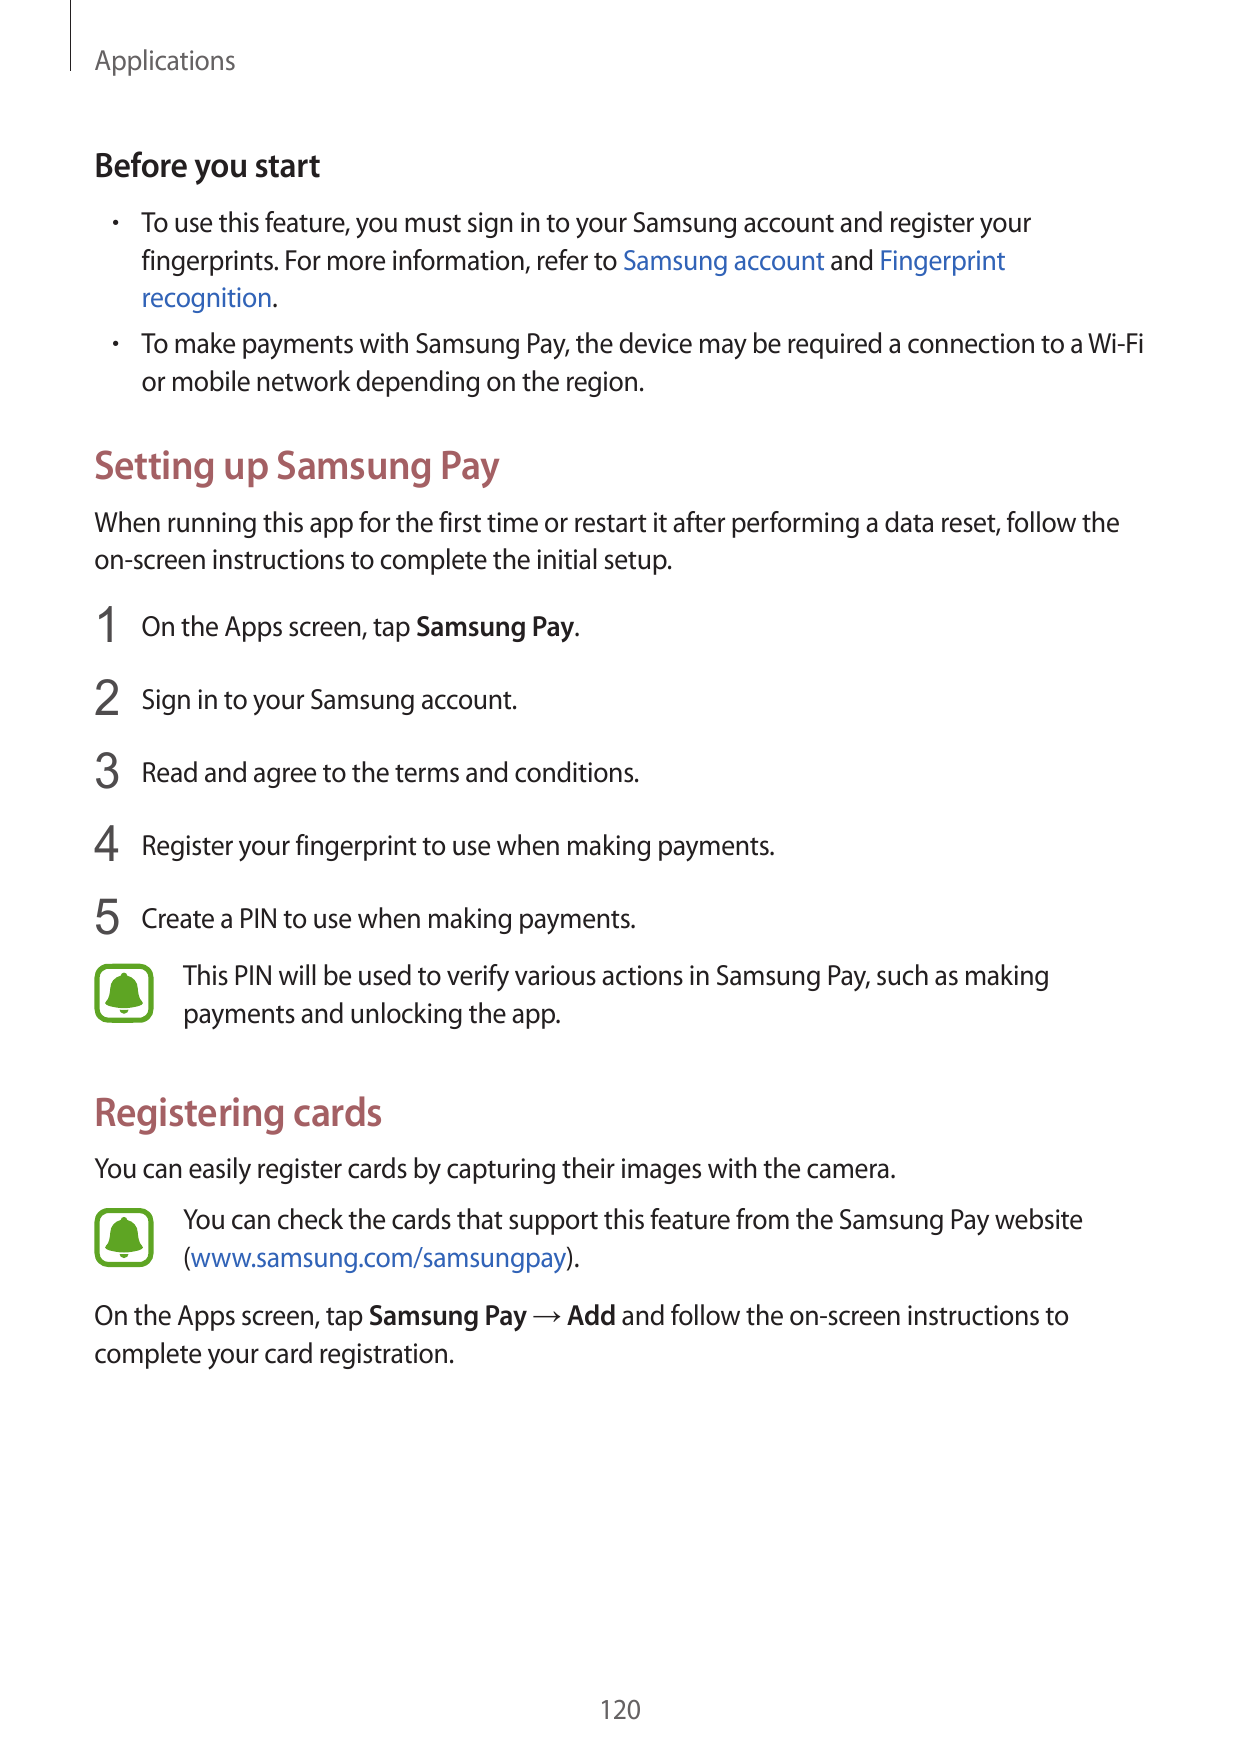 ApplicationsBefore you start• To use this feature, you must sign in to your Samsung account and register yourfingerprints. For m